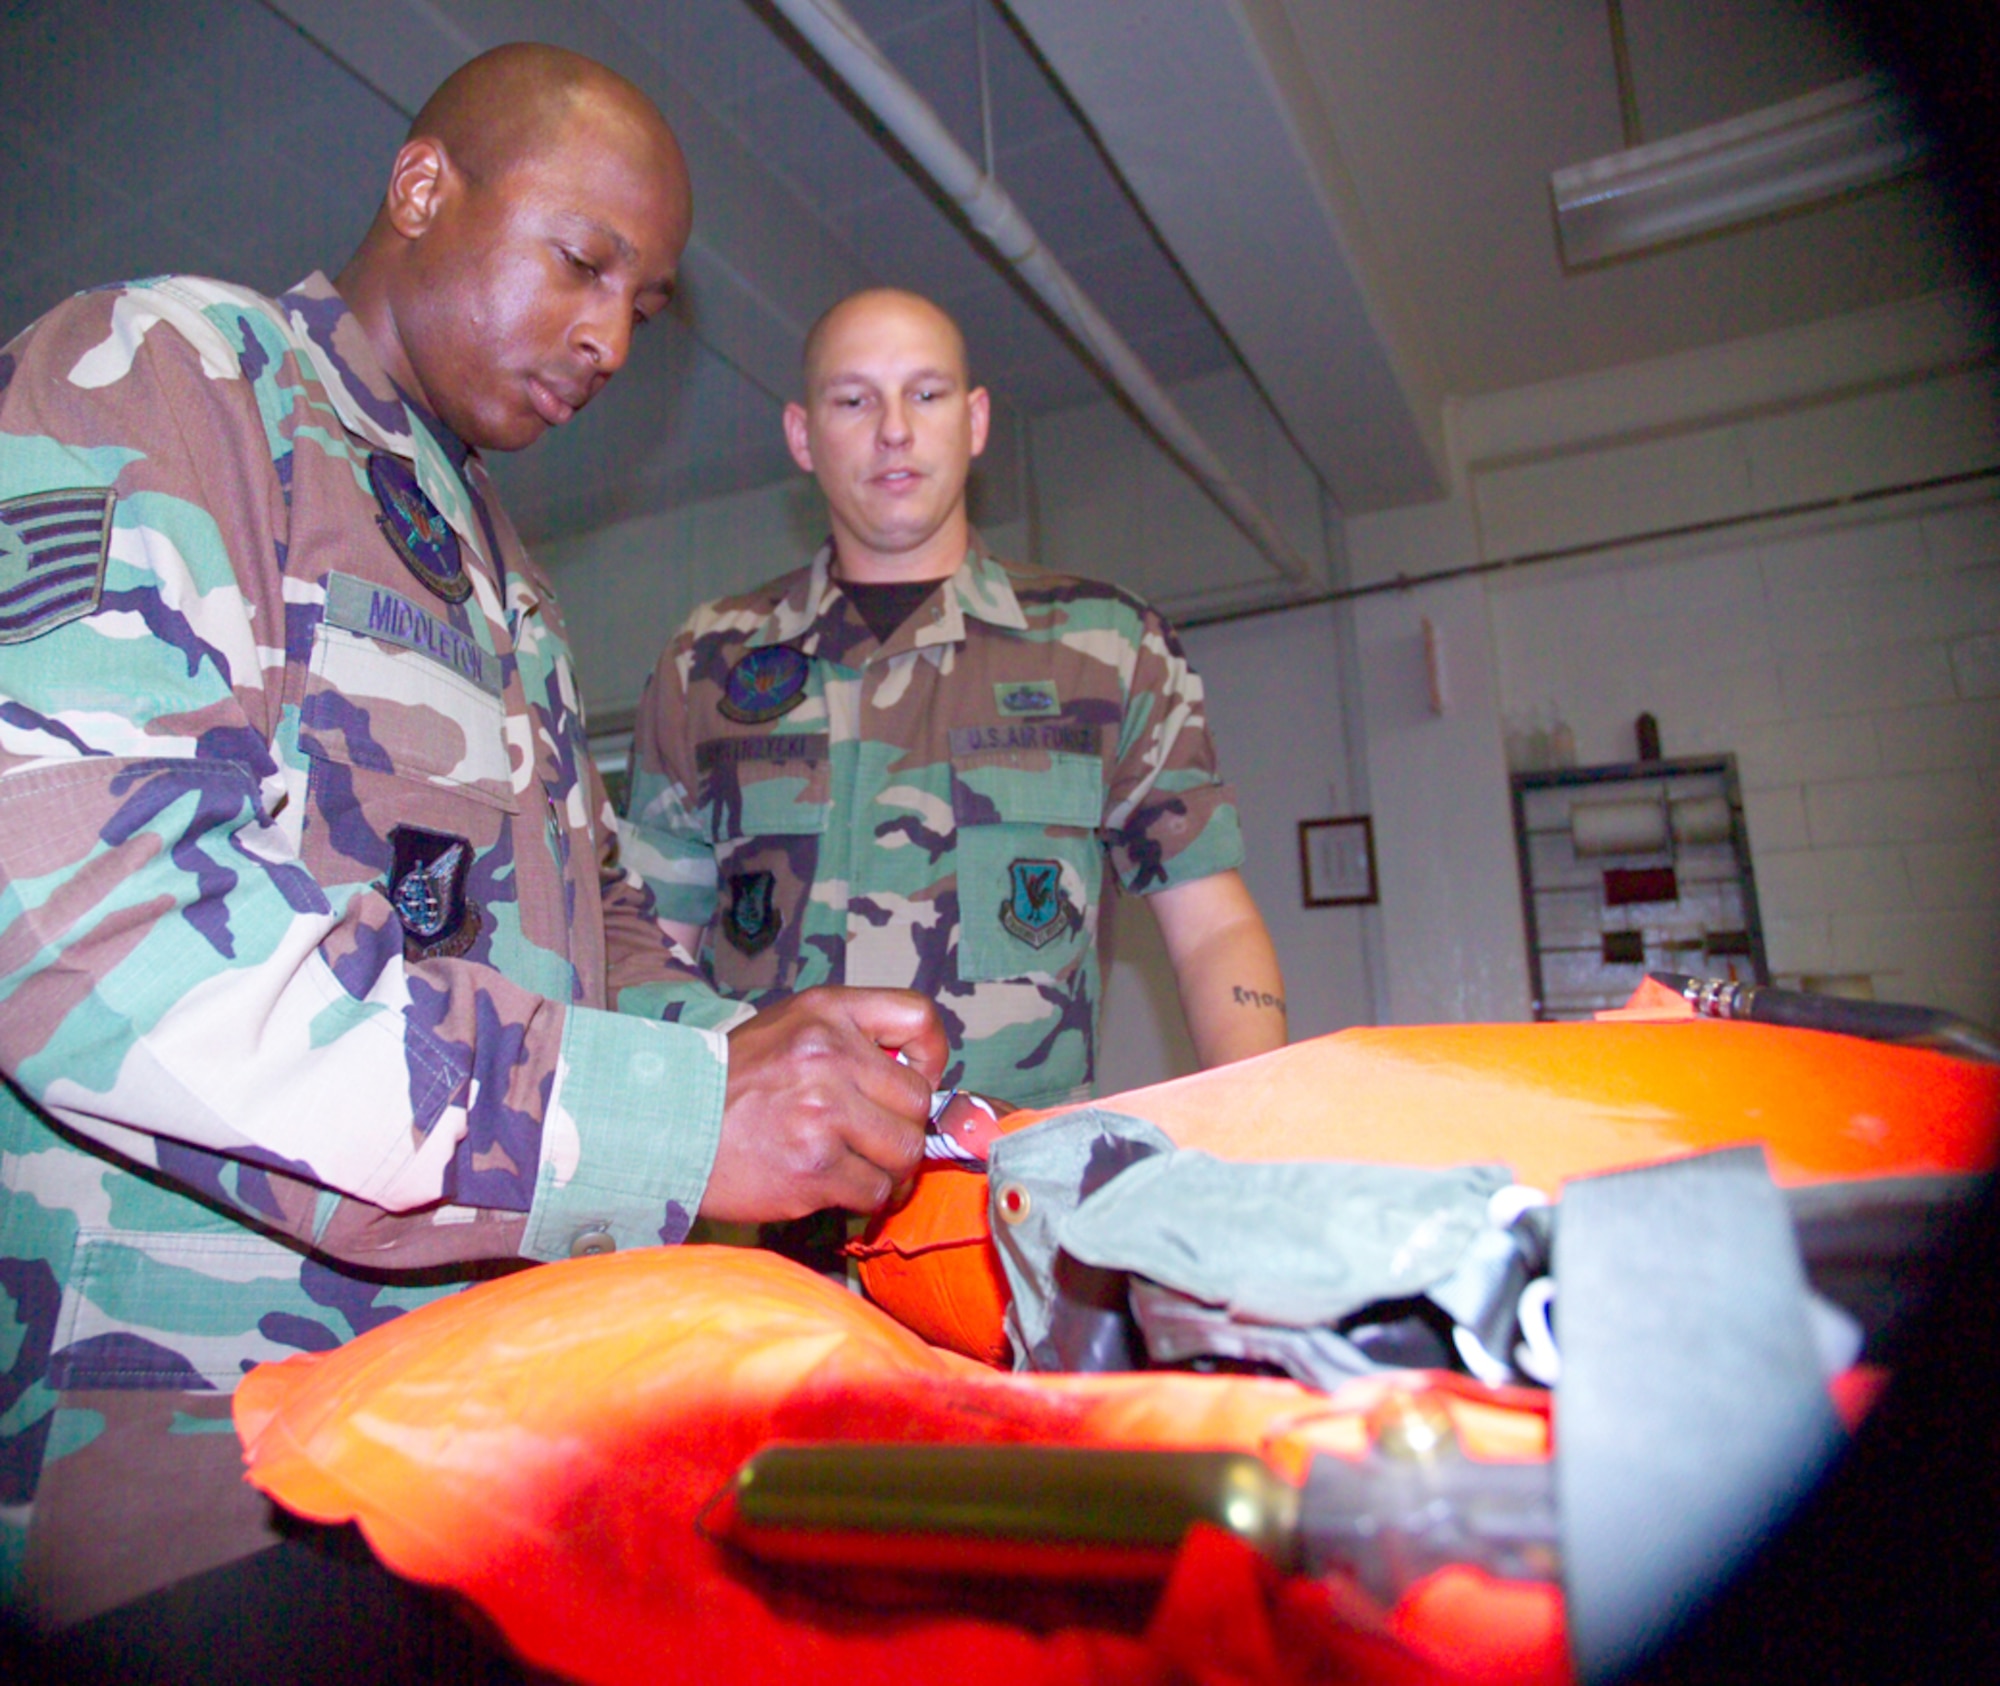 Staff Sgt. Richard Bystrzycki, right, shows Tech. Sgt. Timothy Middleton, left, maintenance procedures on a life preserver unit during cross training into the new aircrew flight equipment career field at the 18th Operations Squadron Kadena Air Base, Japan. U.S. Air Force/Scott Hallford